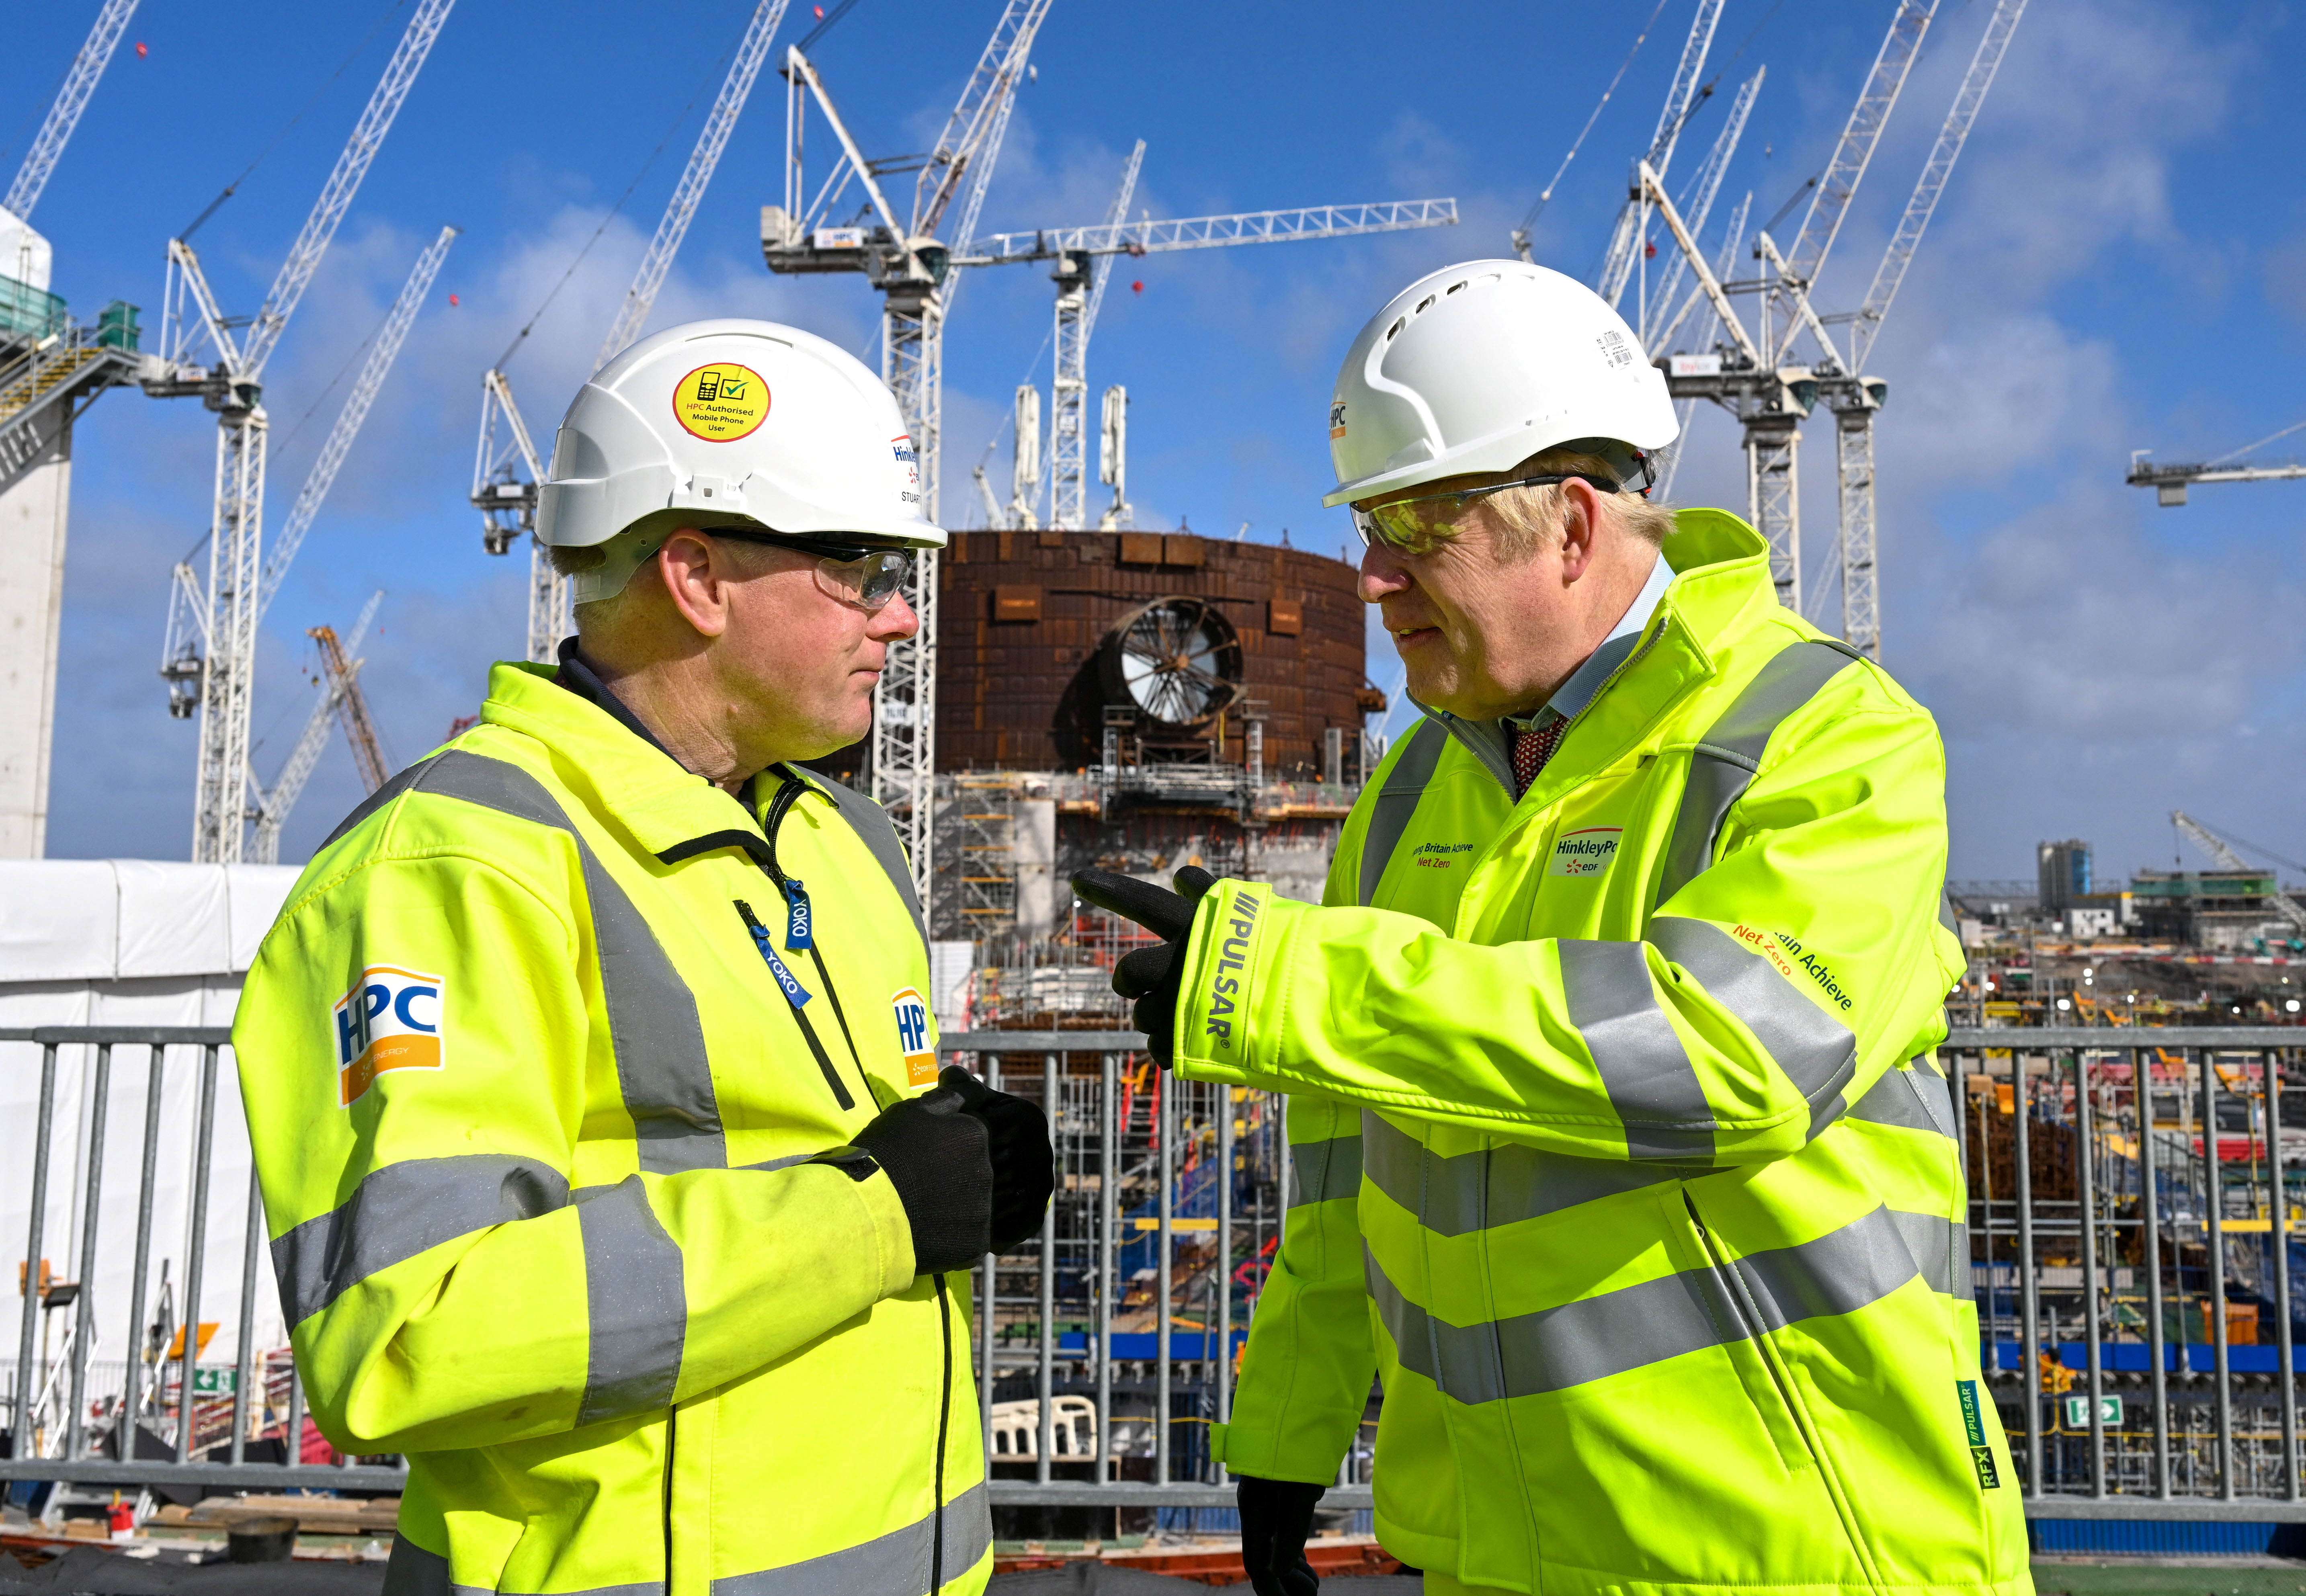 Britain's Prime Minister Boris Johnson visits Hinkley Point C Nuclear Power Station construction site, at Bridgwater